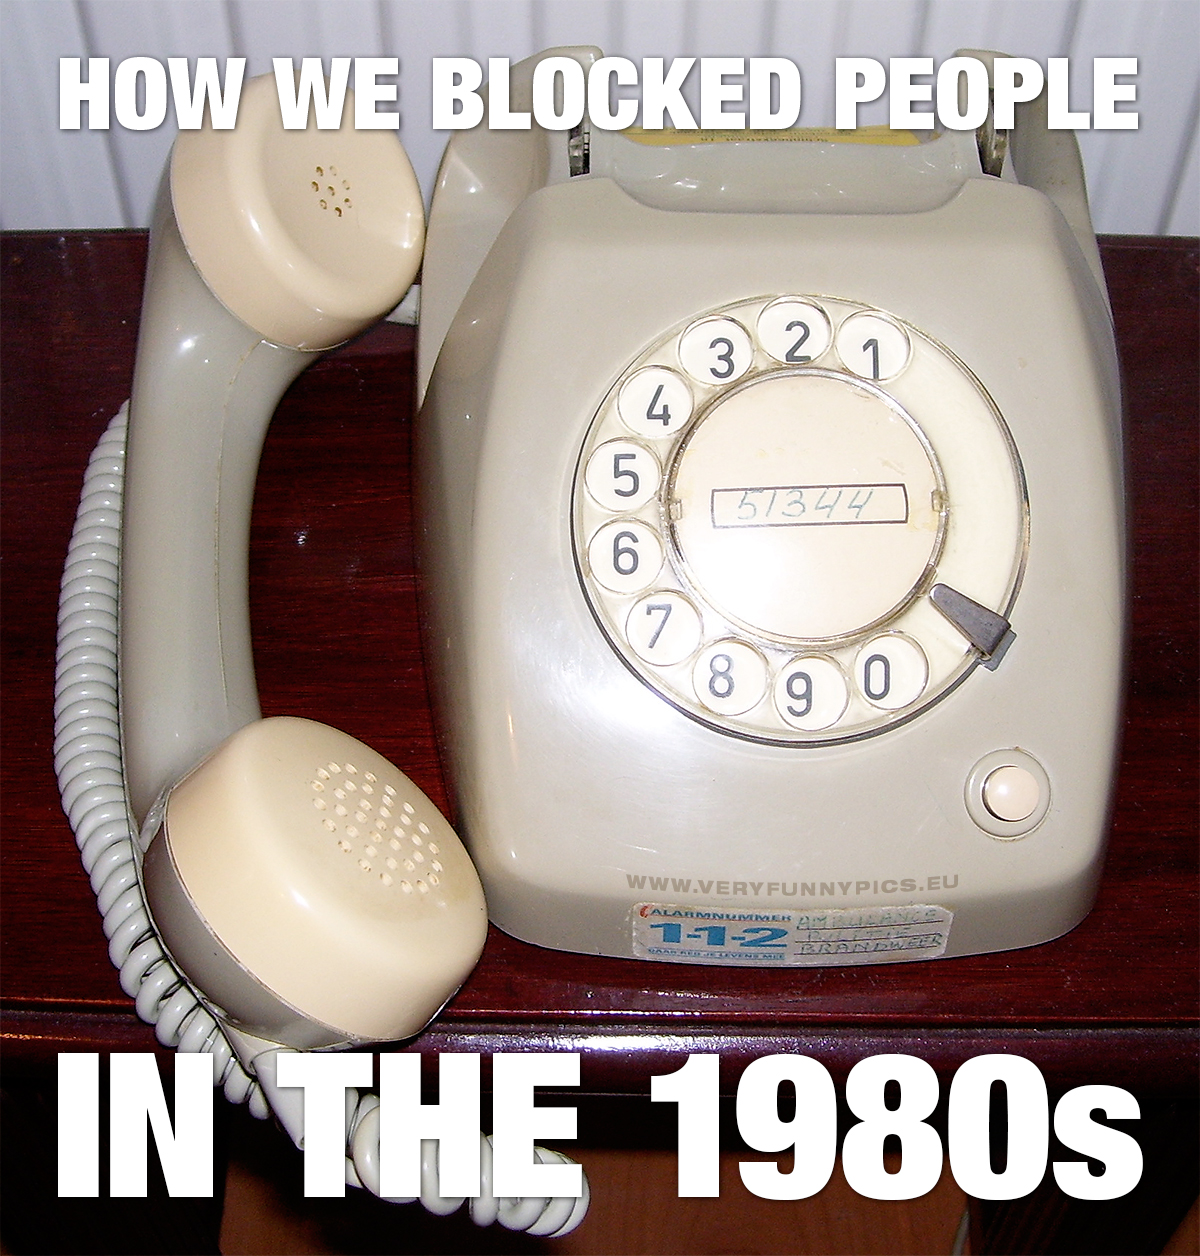 Phone of the hook - How we blocked people in the 1980s